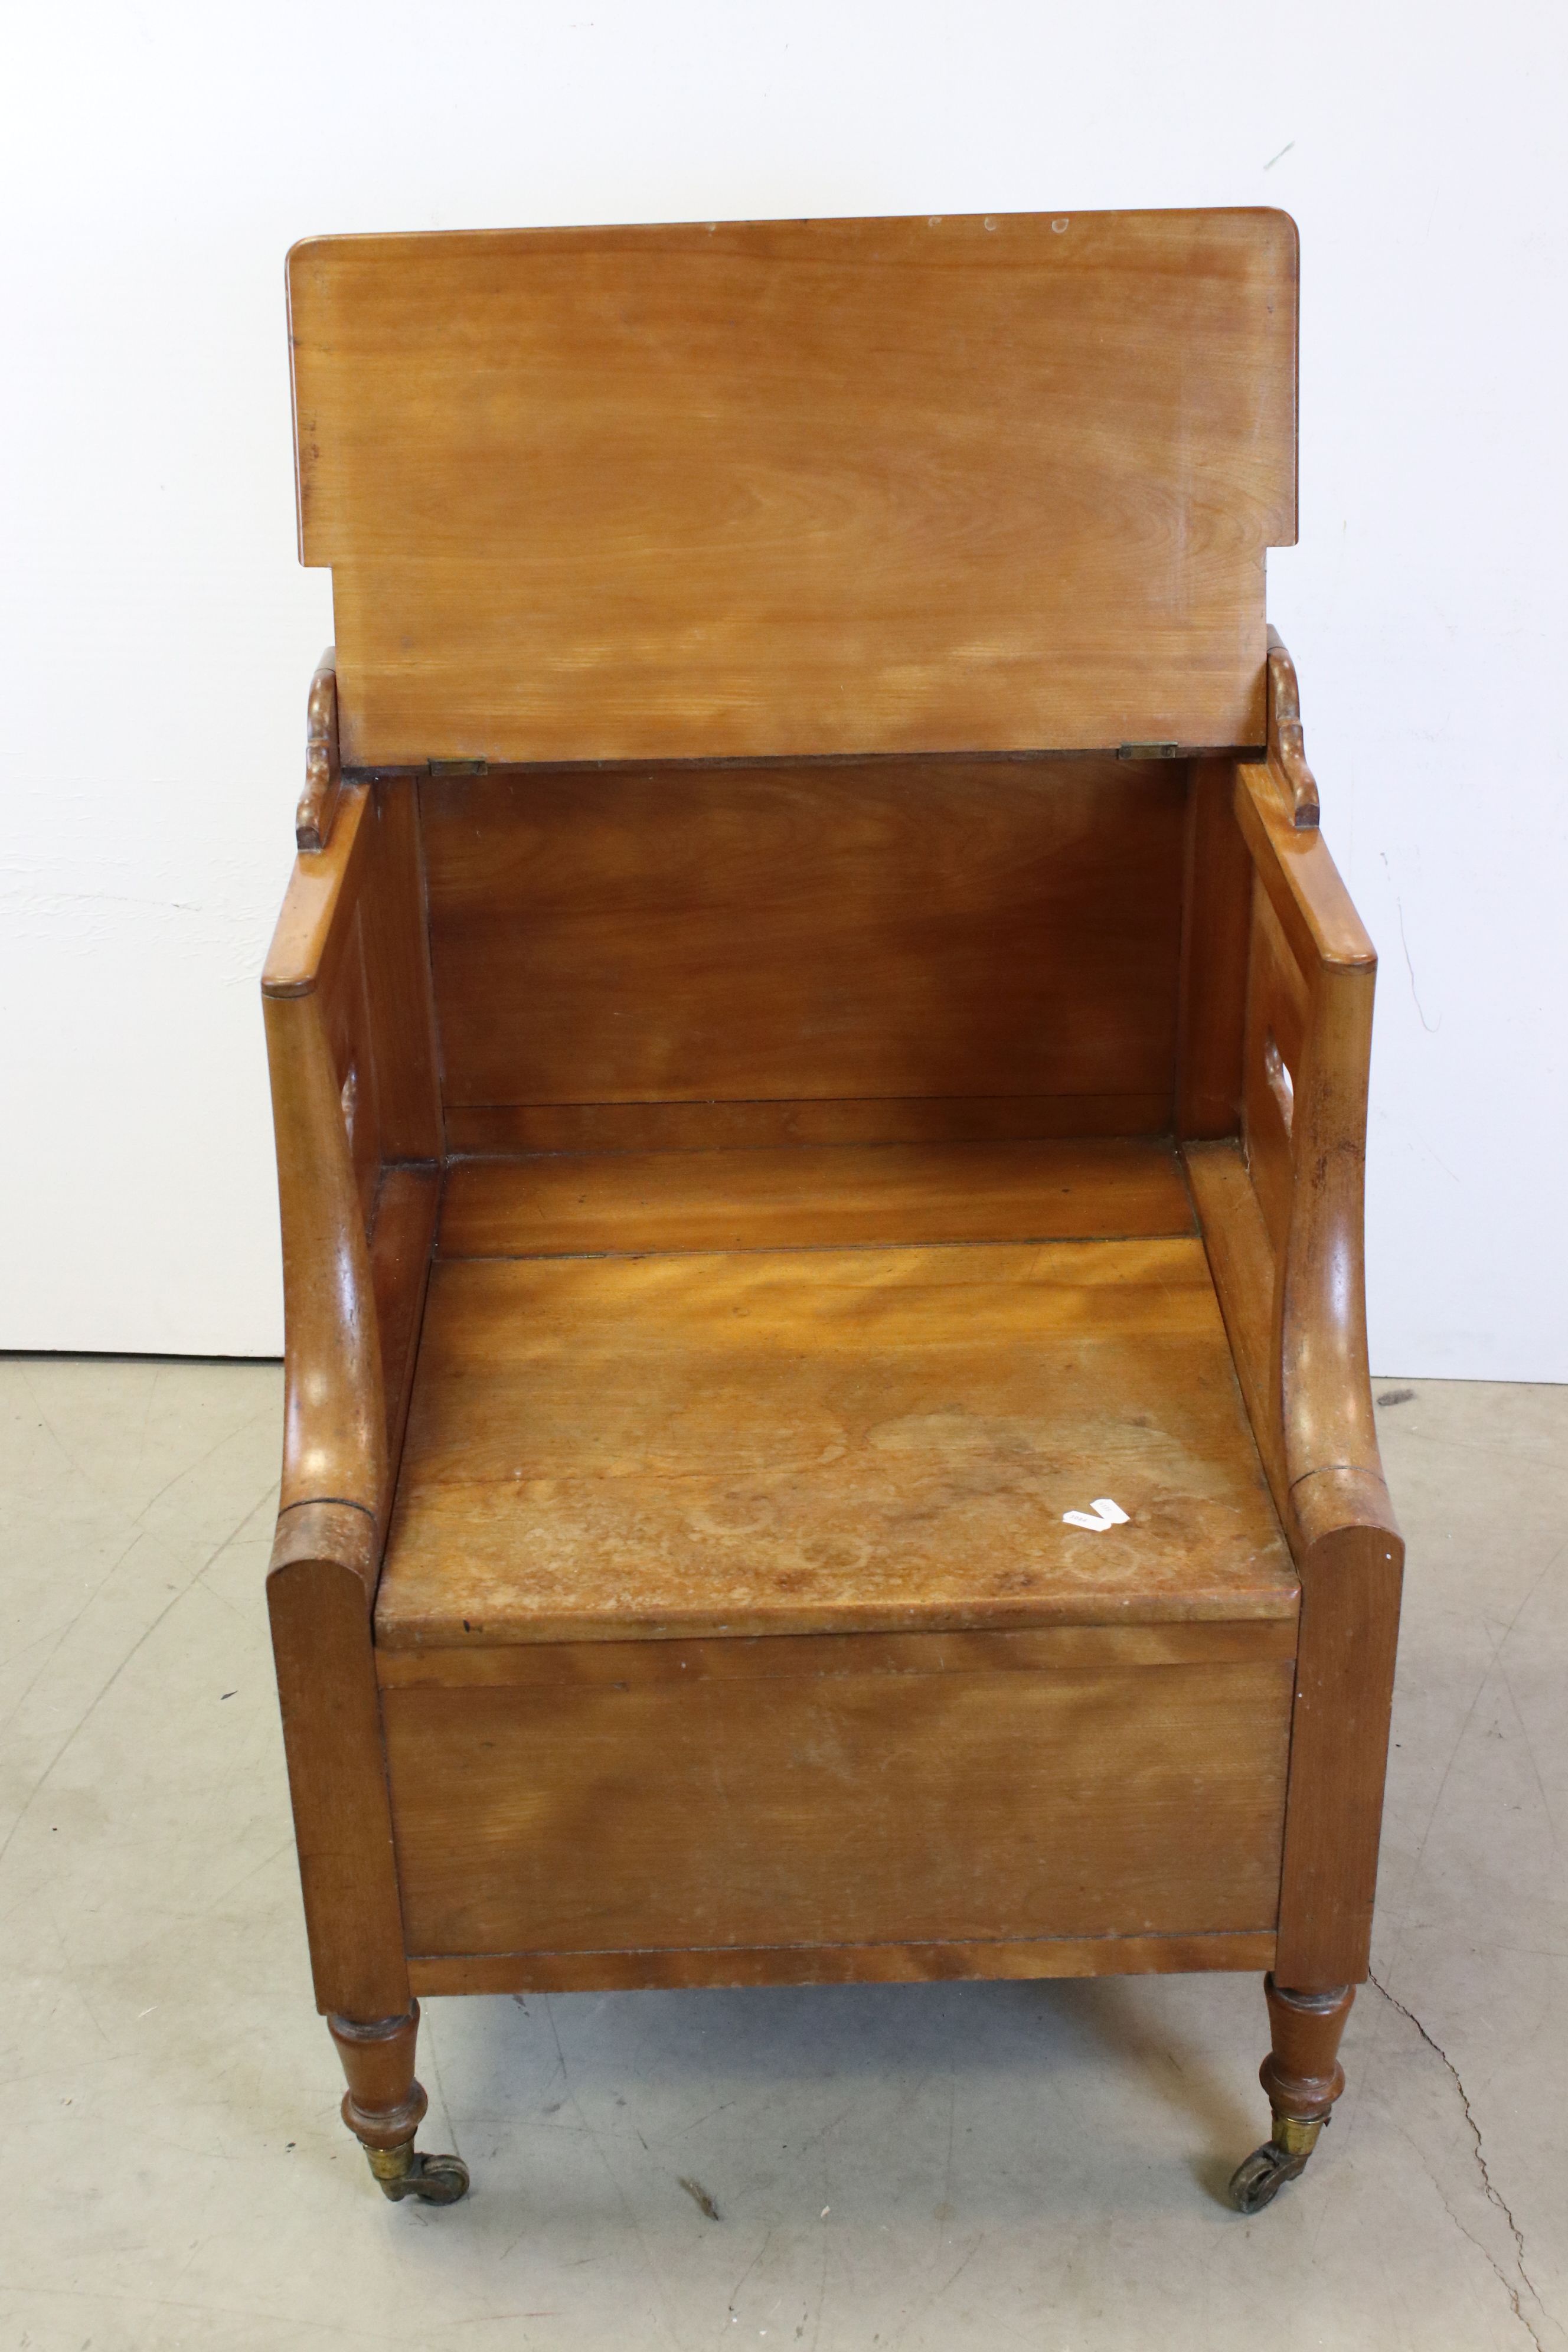 Victorian Walnut Box Seat Commode, with hinged lid above a hinged seat, raised on a turned legs with - Image 3 of 6